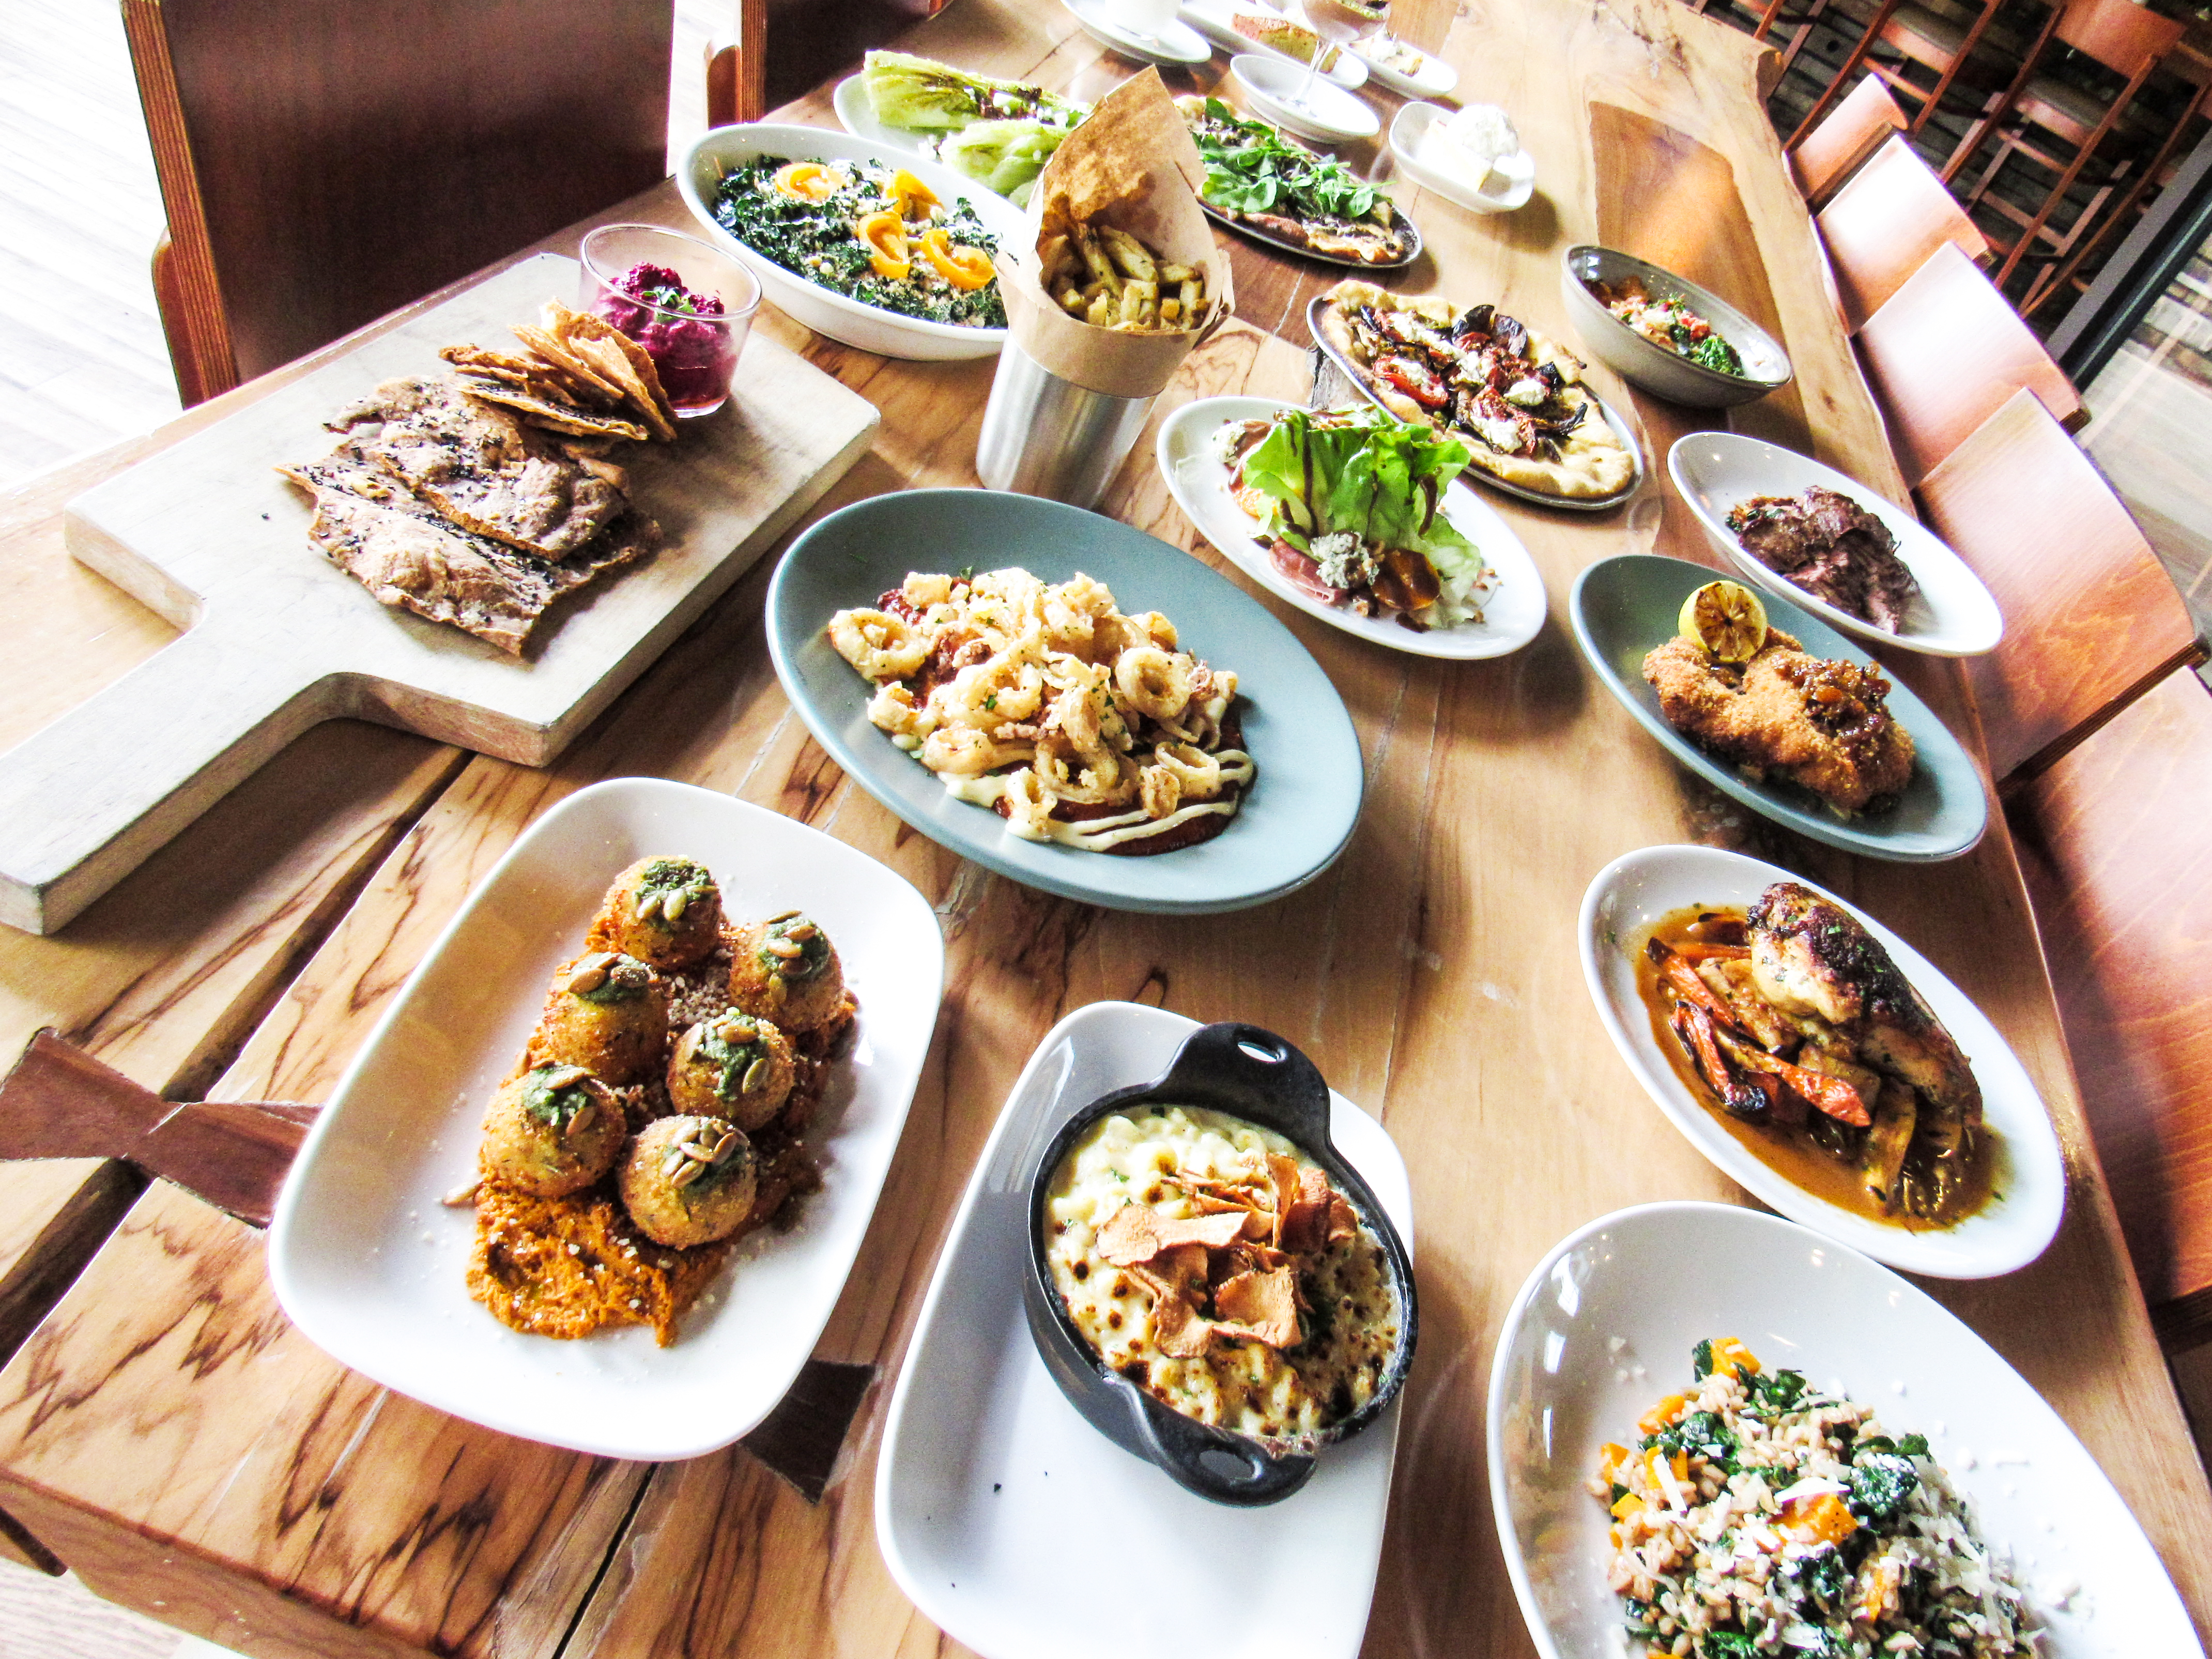 It’s Fall, Y’all! City Winery Launches New Seasonal Menu